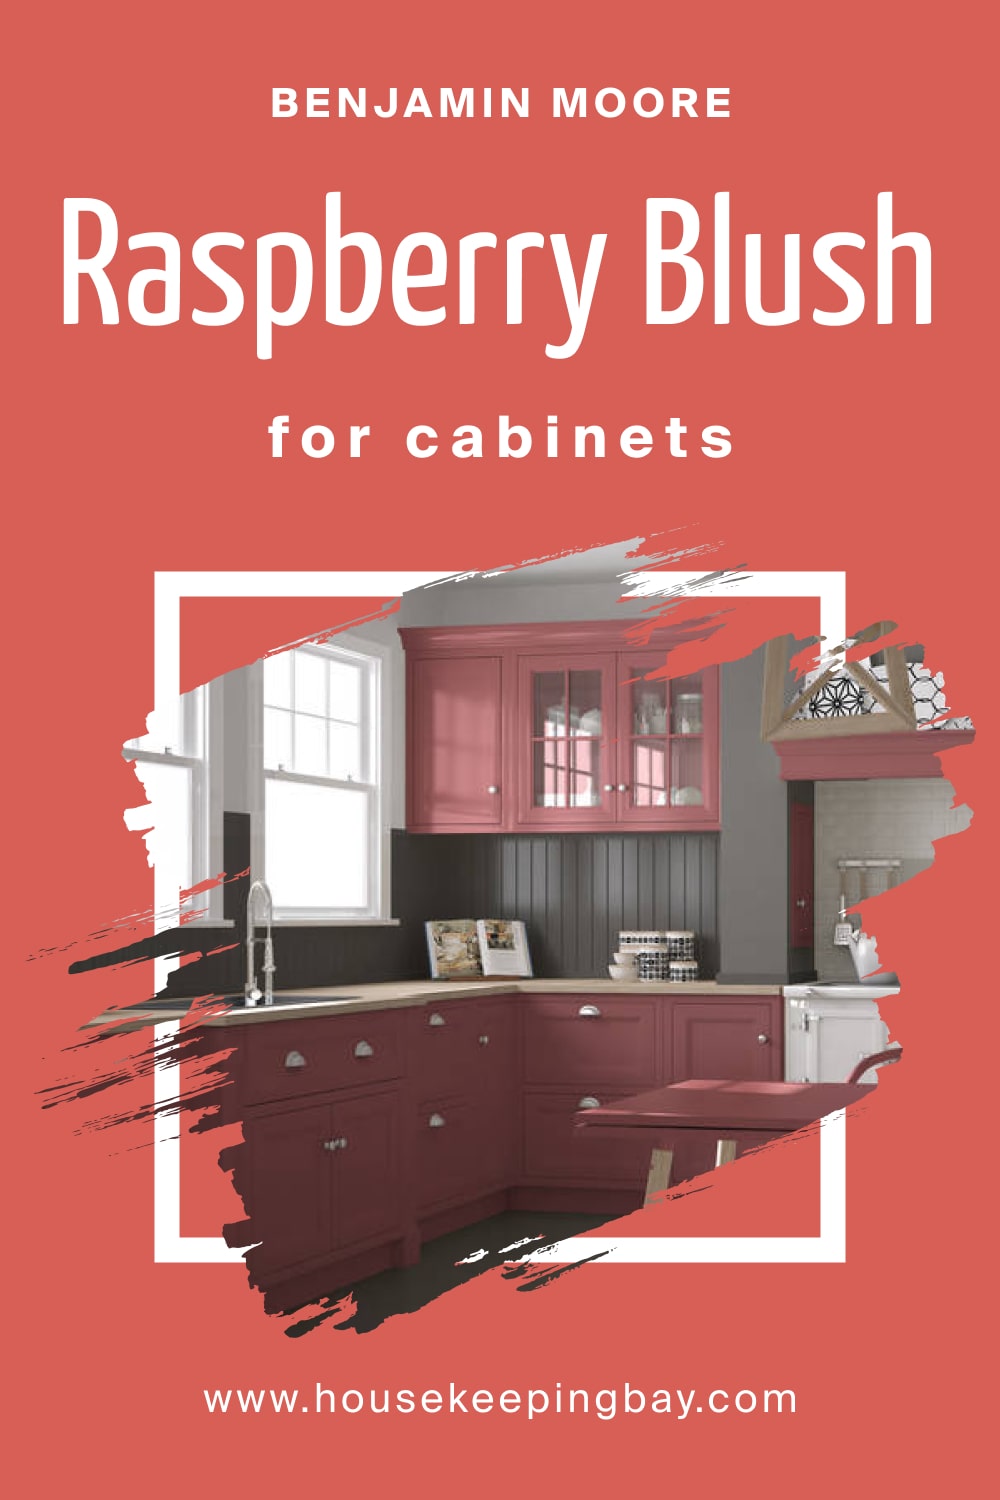 Benjamin Moore. Raspberry Blush 2008 30 For Cabinets